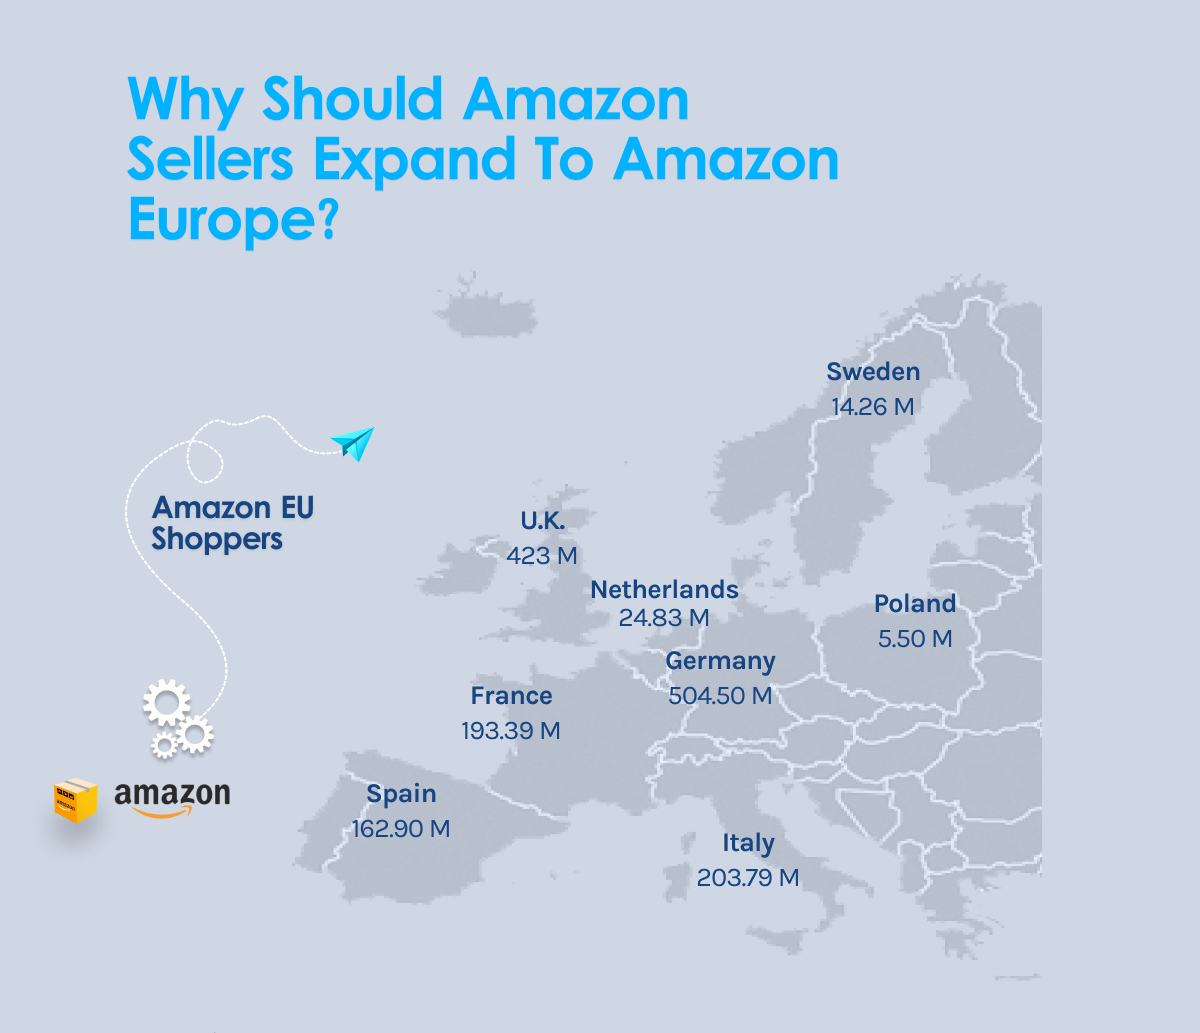 Why Should Amazon Sellers Expand To Amazon Europe